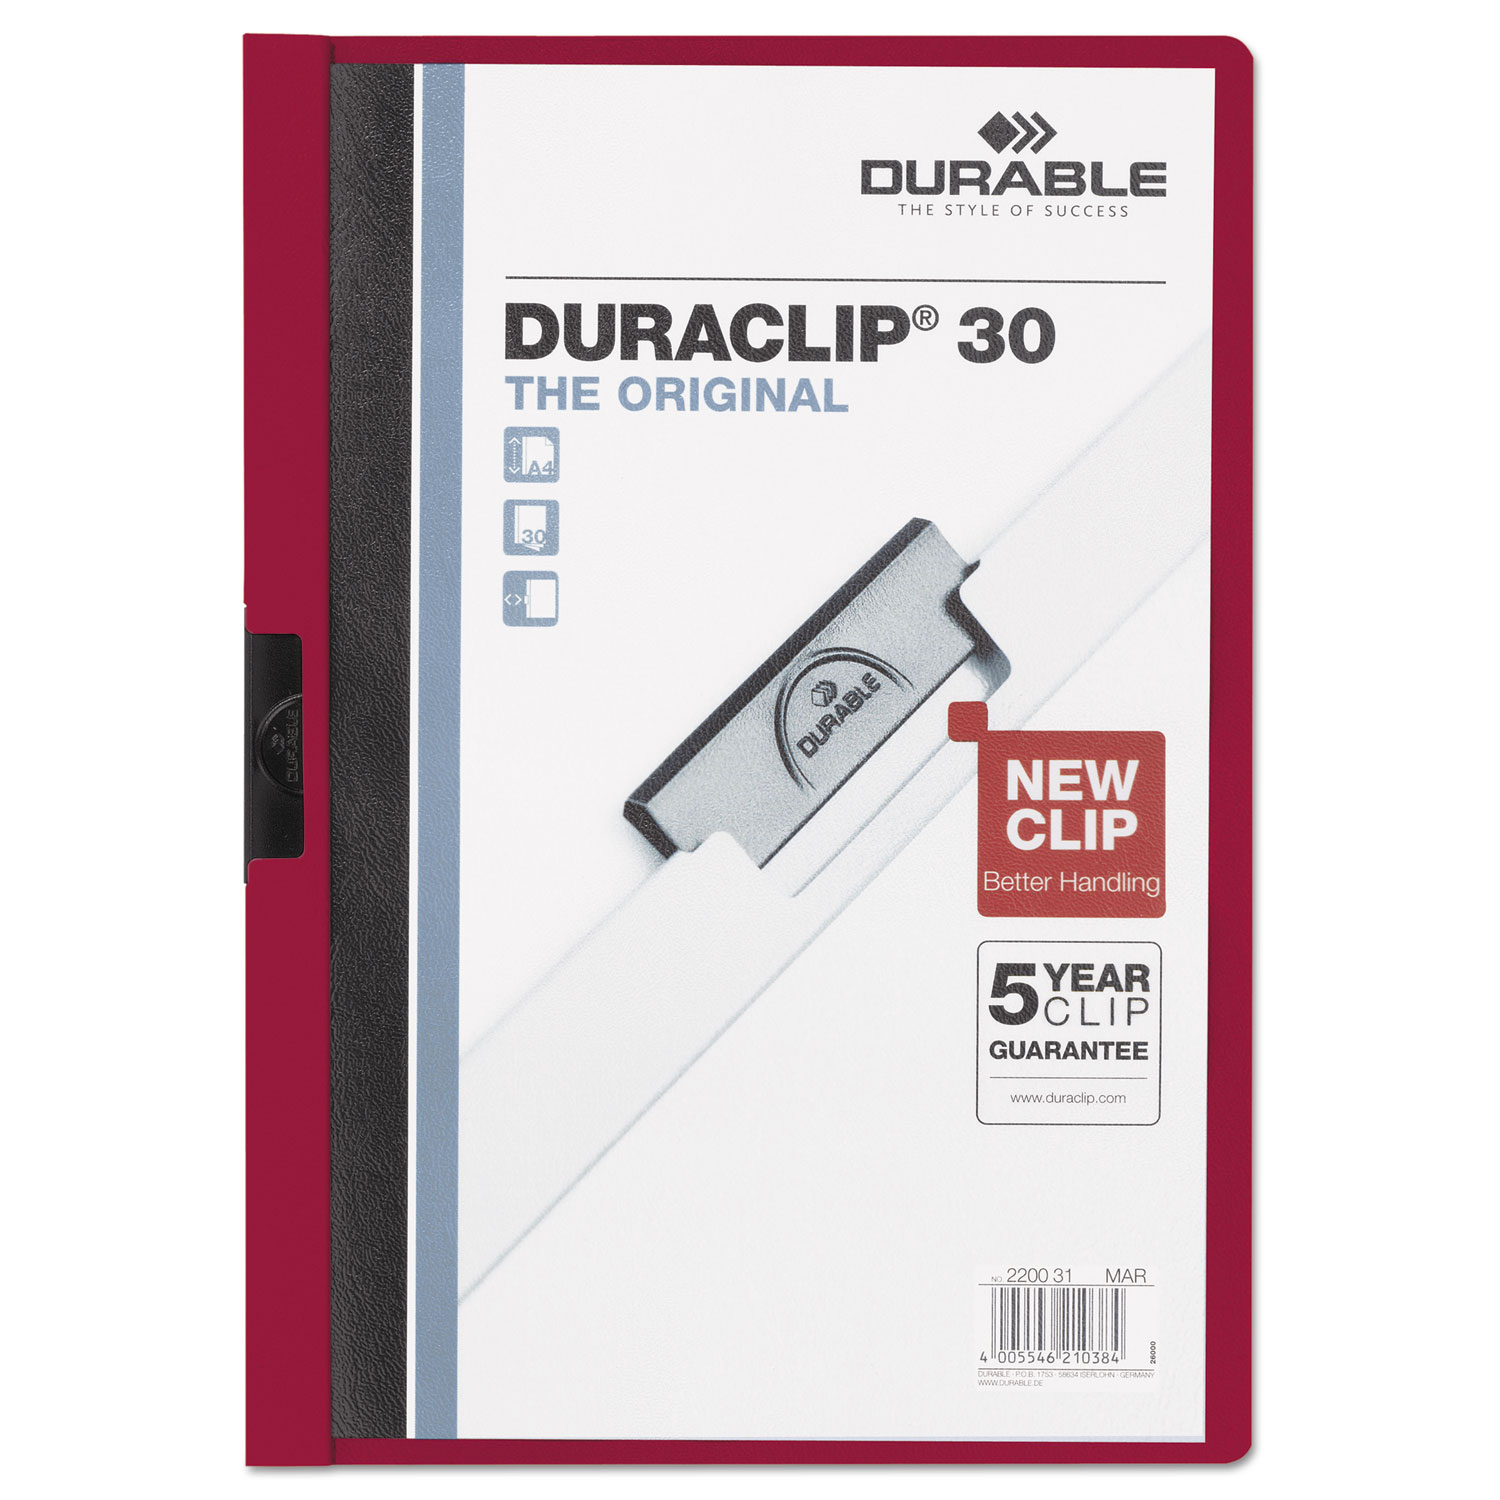 Durable DBL220331 Vinyl DuraClip Report Cover w/Clip, Letter, Holds 30 Pages, Clear/Maroon, 25/Box